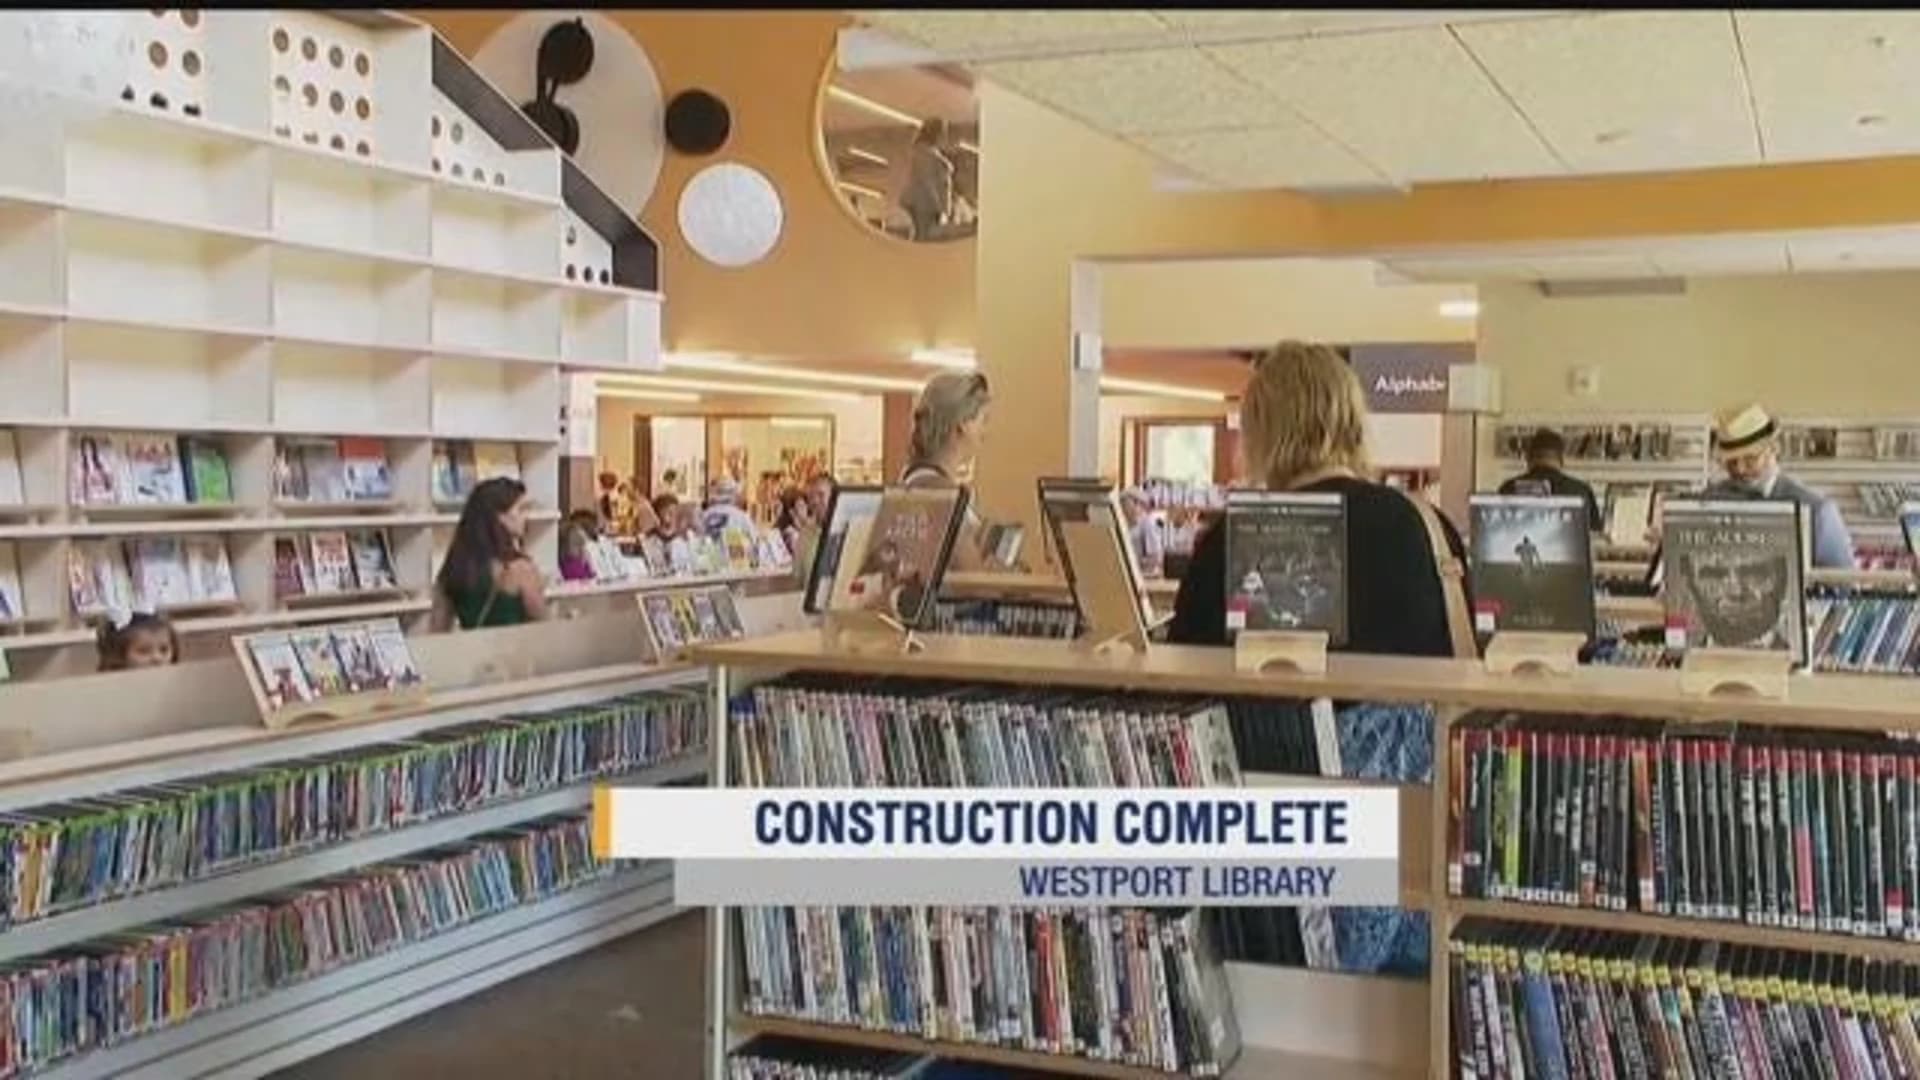 Westport Library reopens following 2 years of construction